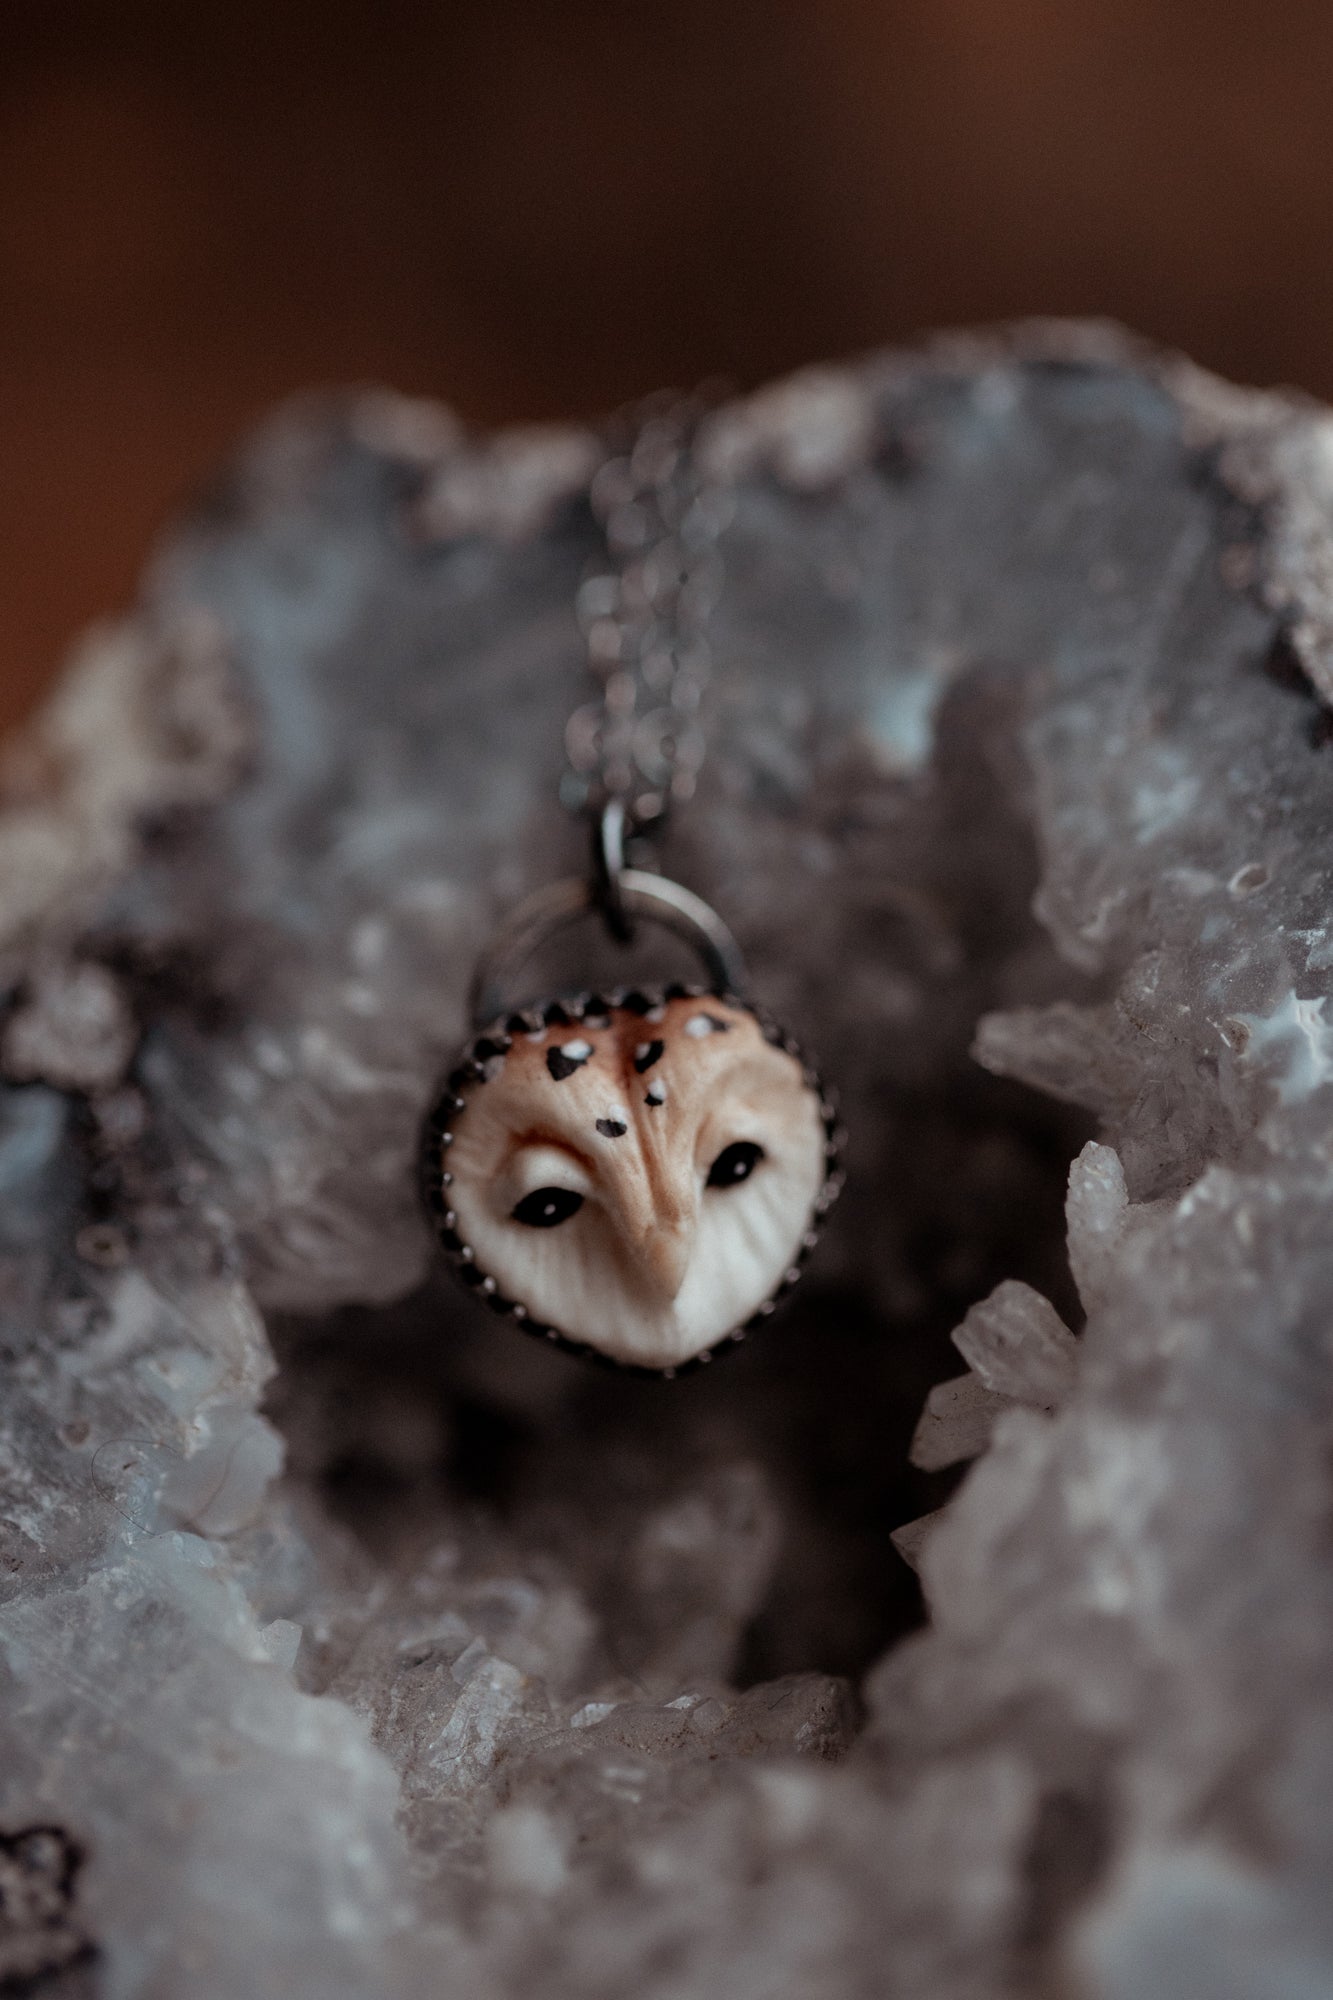 Small owl necklace